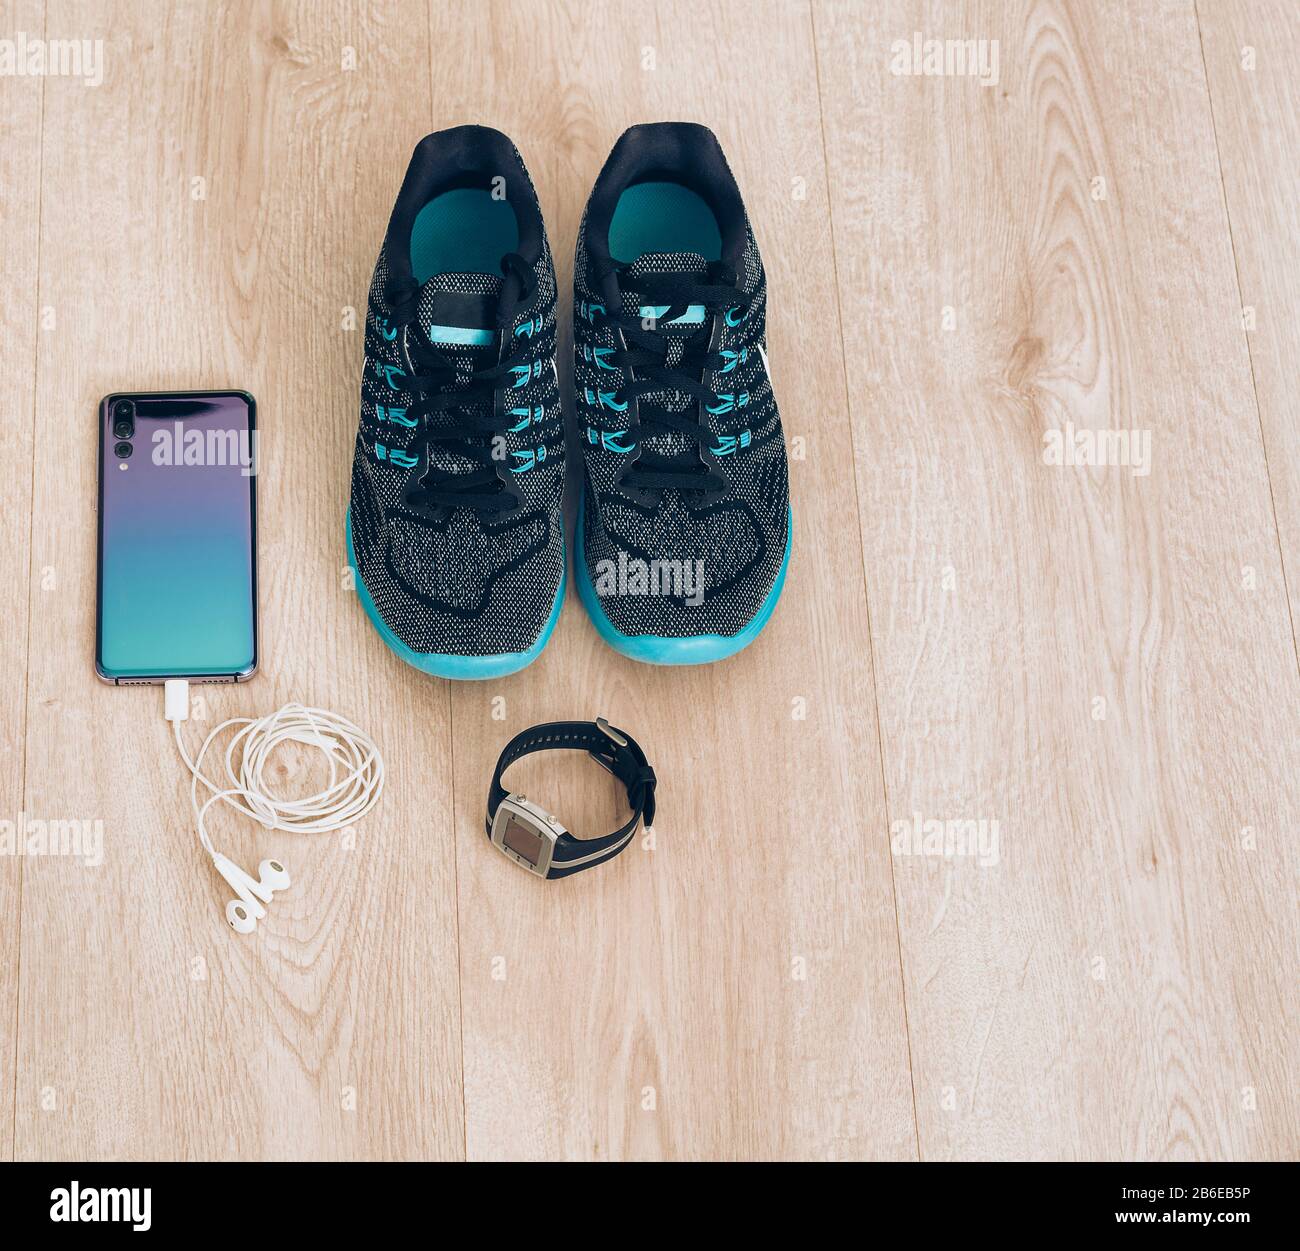 Cool runner sneakers with smartphone, earphones and fitbit sport watch. Ready for training, healthy life Stock Photo